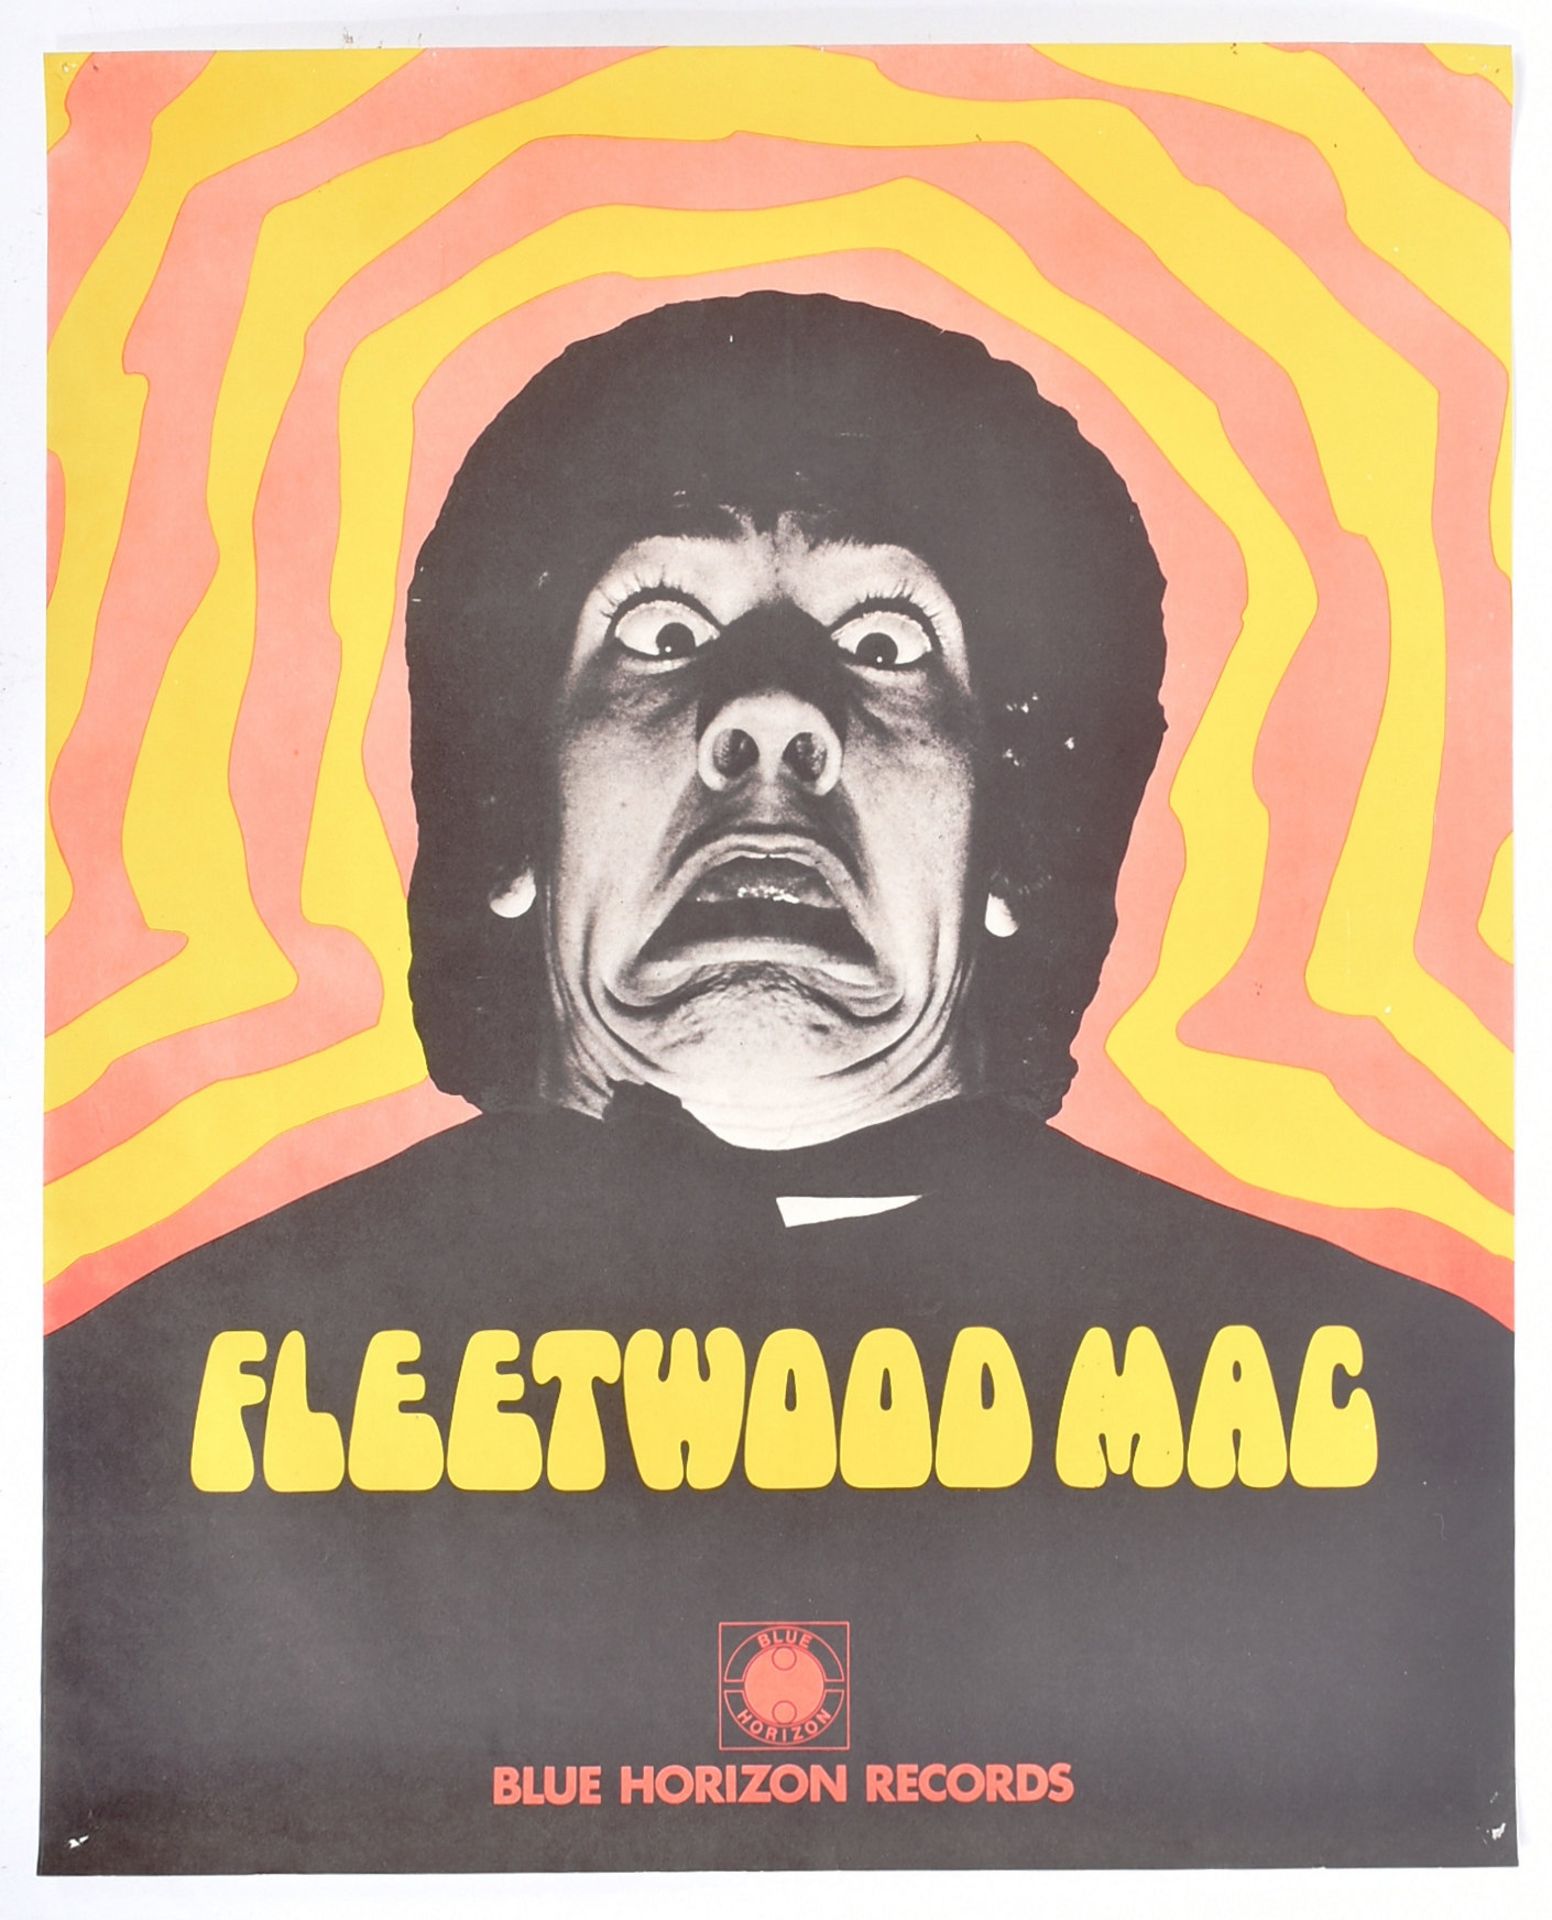 MUSIC POSTER - EARLY 1968/69 FLEETWOOD MAC POSTER